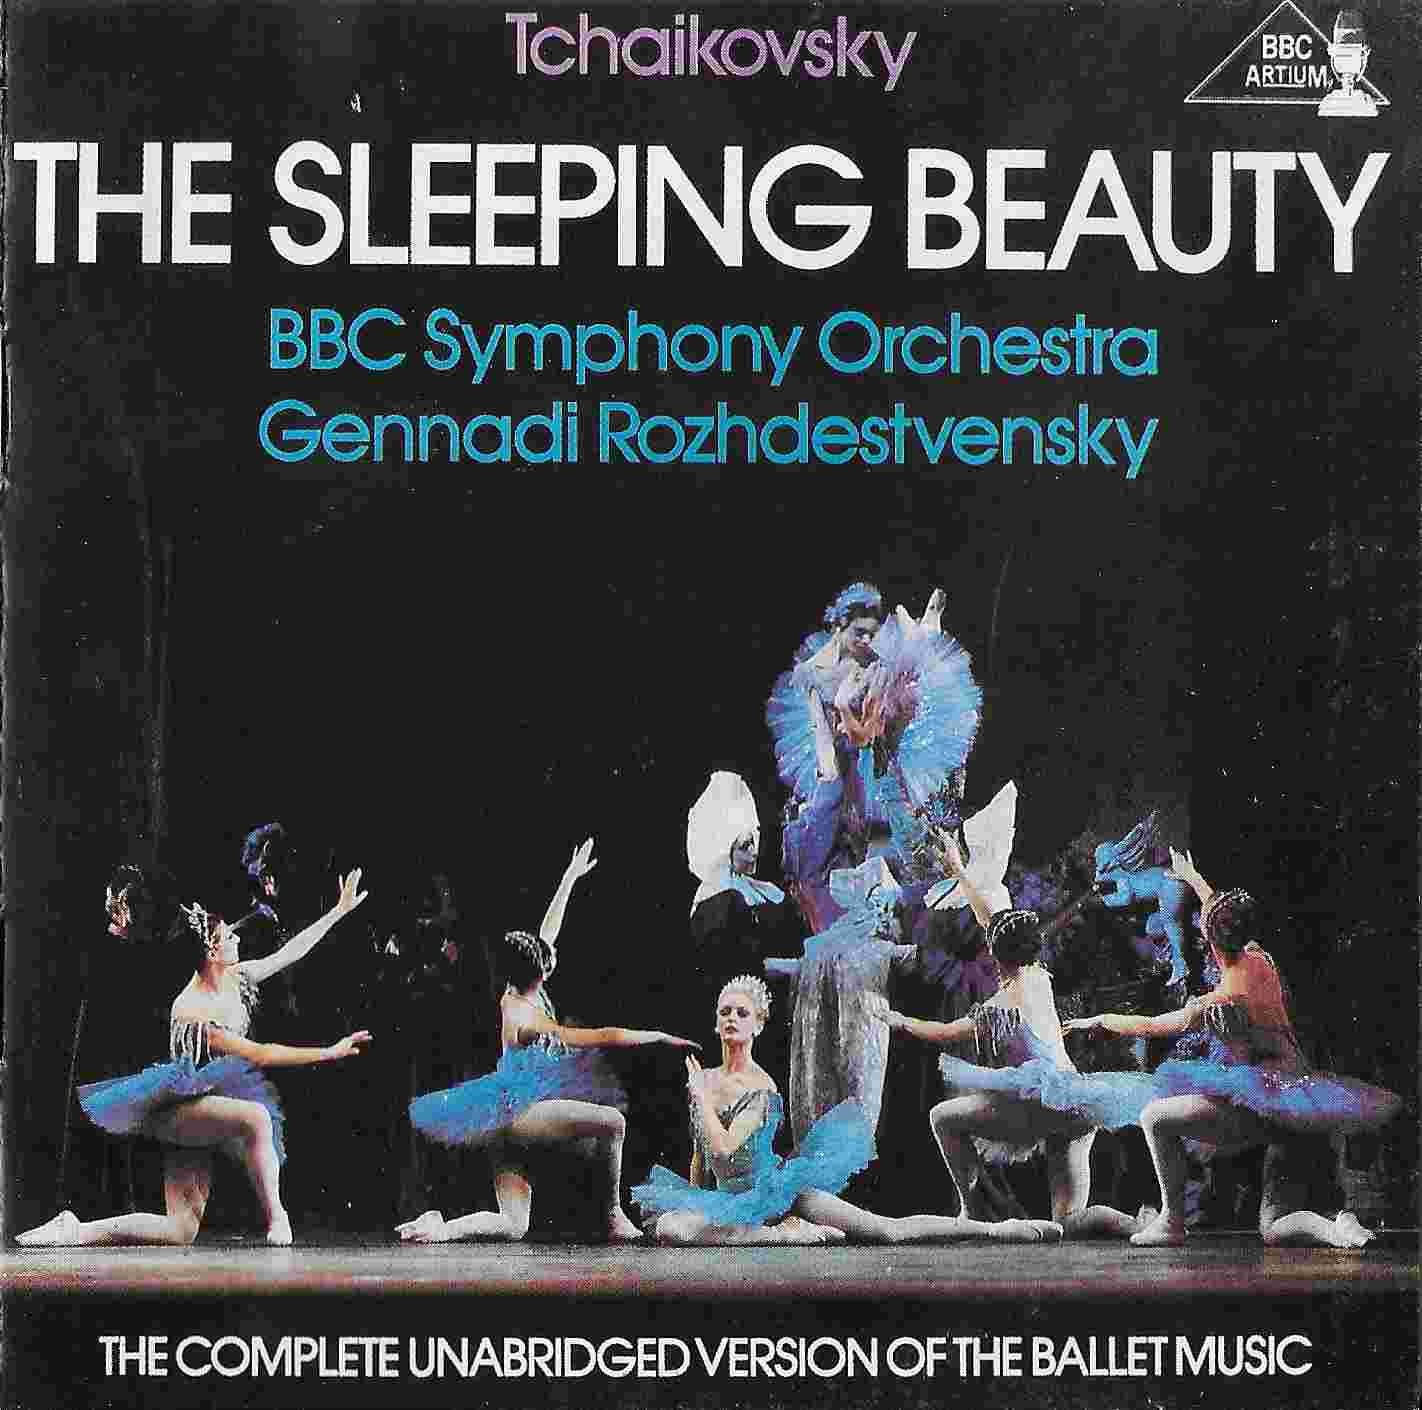 Picture of BBCCD3003X The sleeping beauty by artist Tchaikovsky from the BBC records and Tapes library